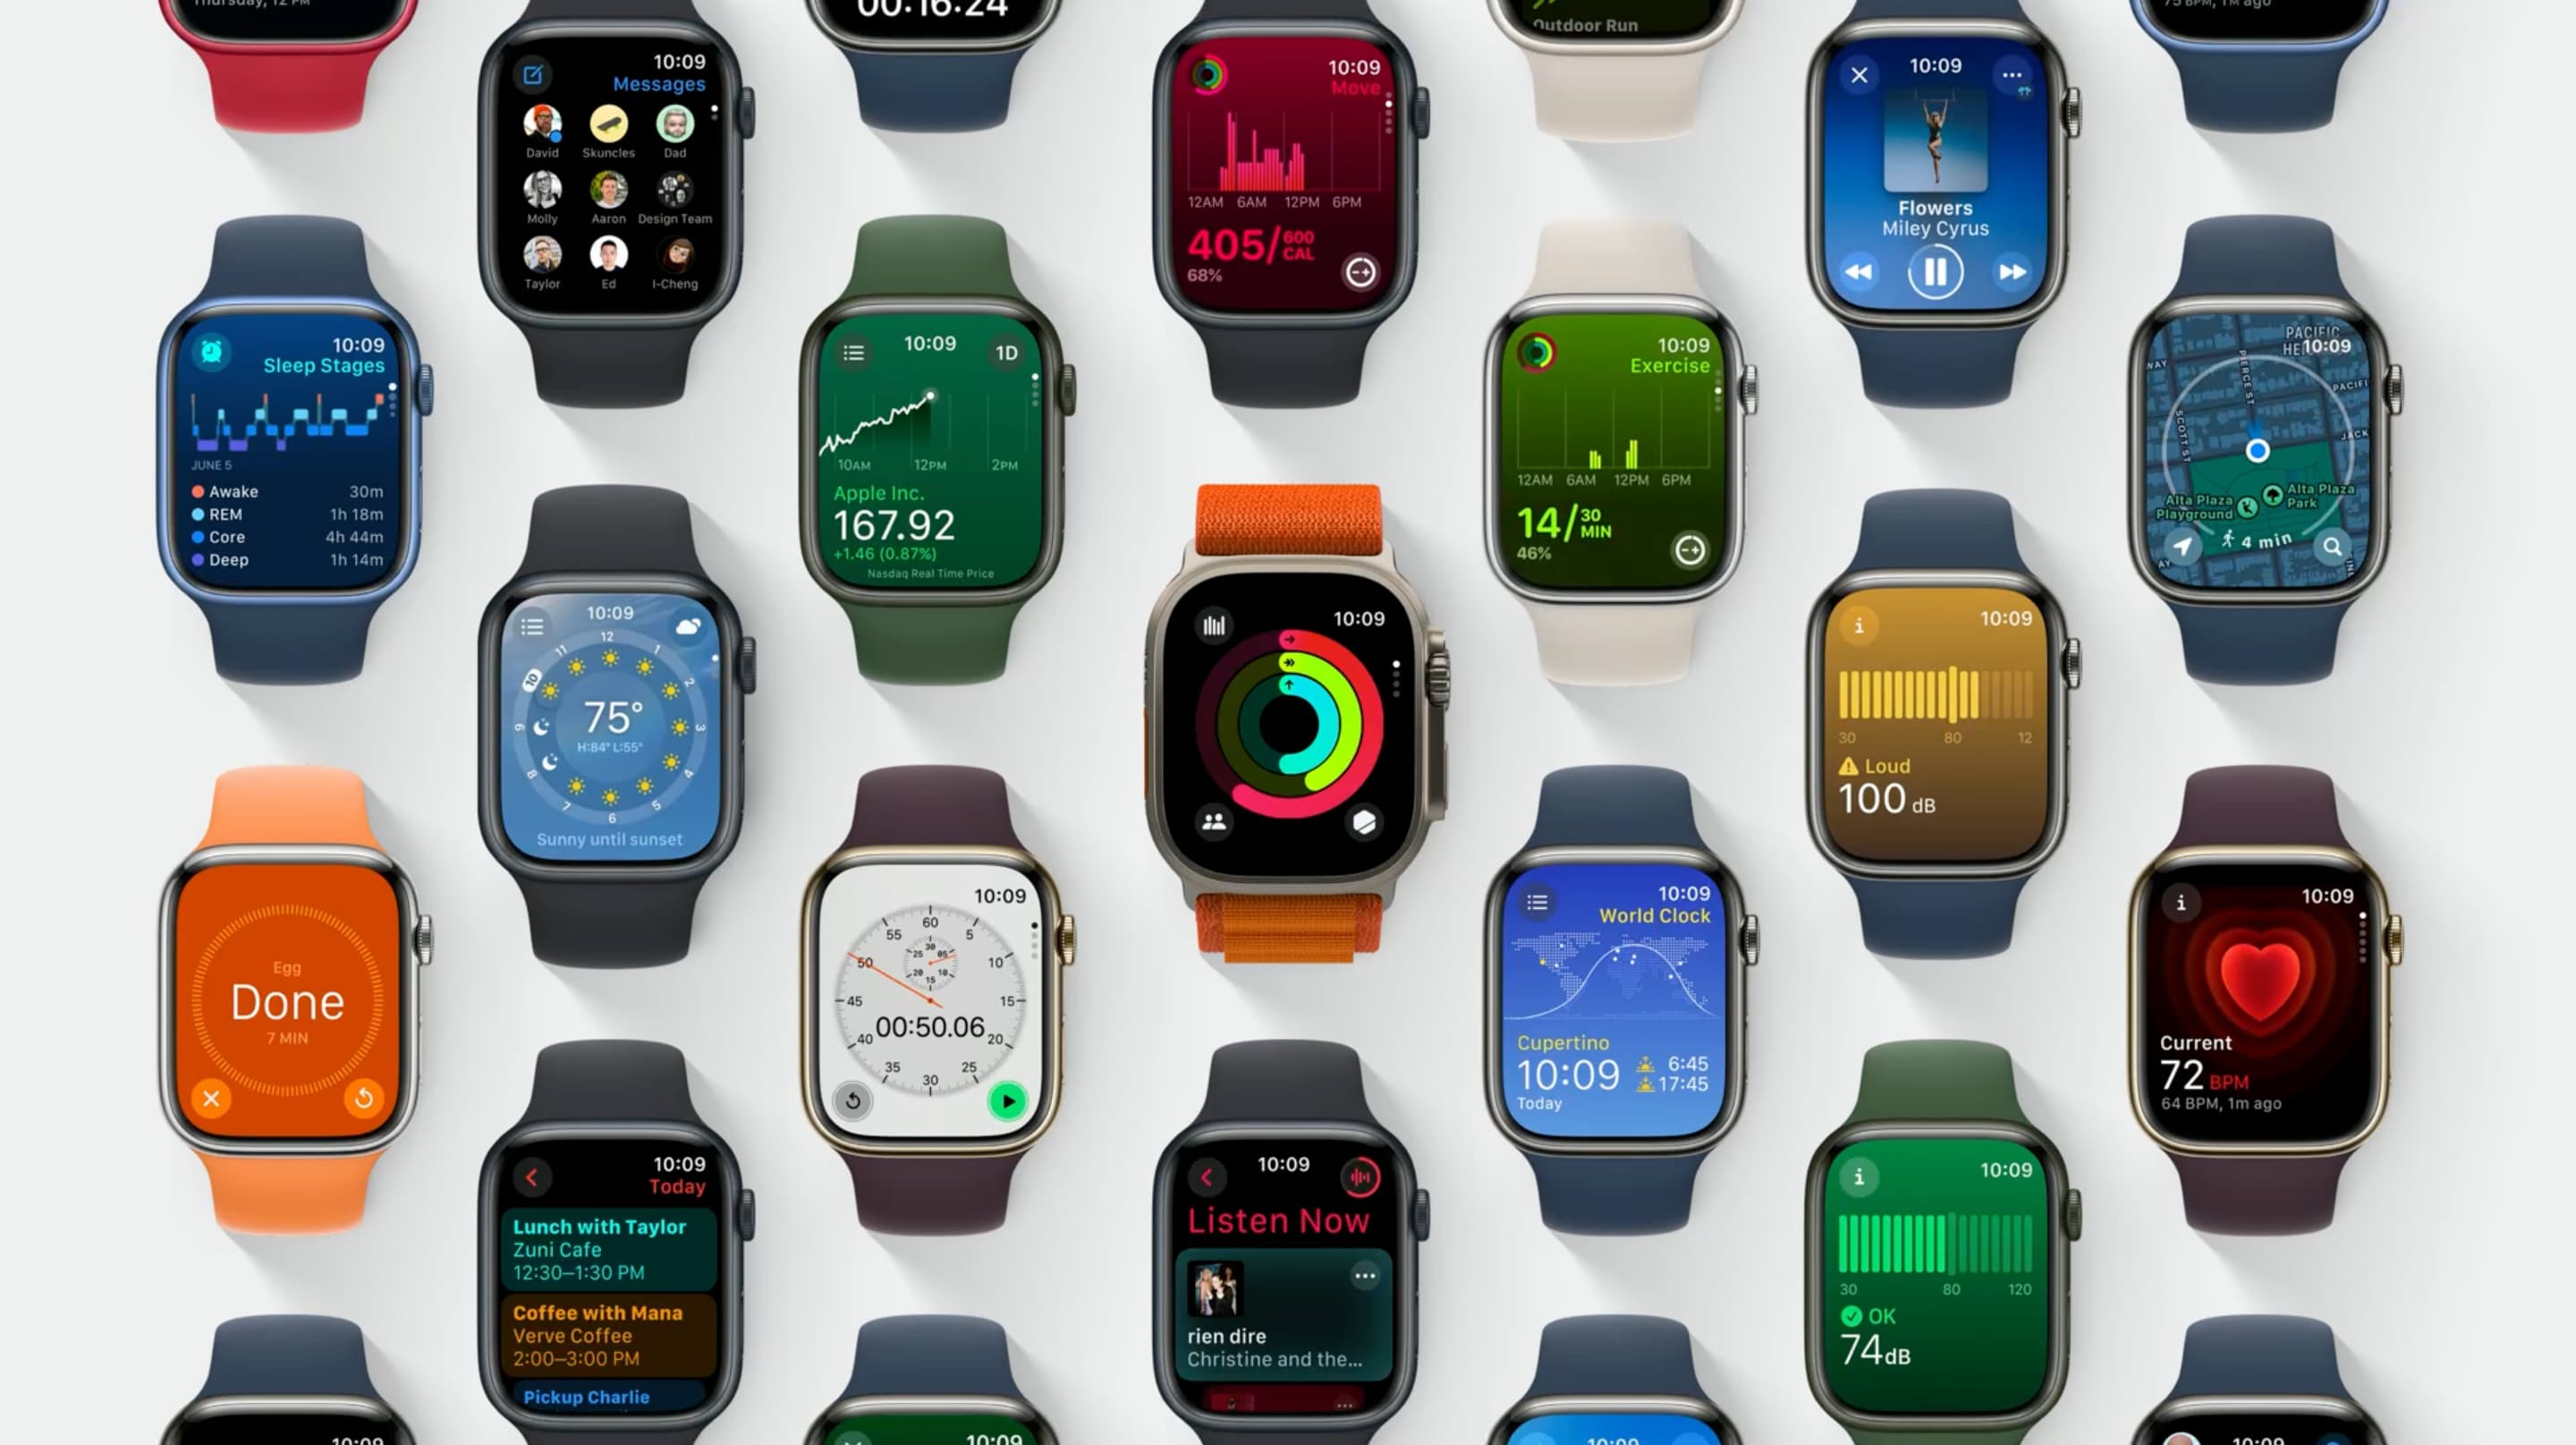 How to Build an App for watchOS With No-code Tools? | AppMaster